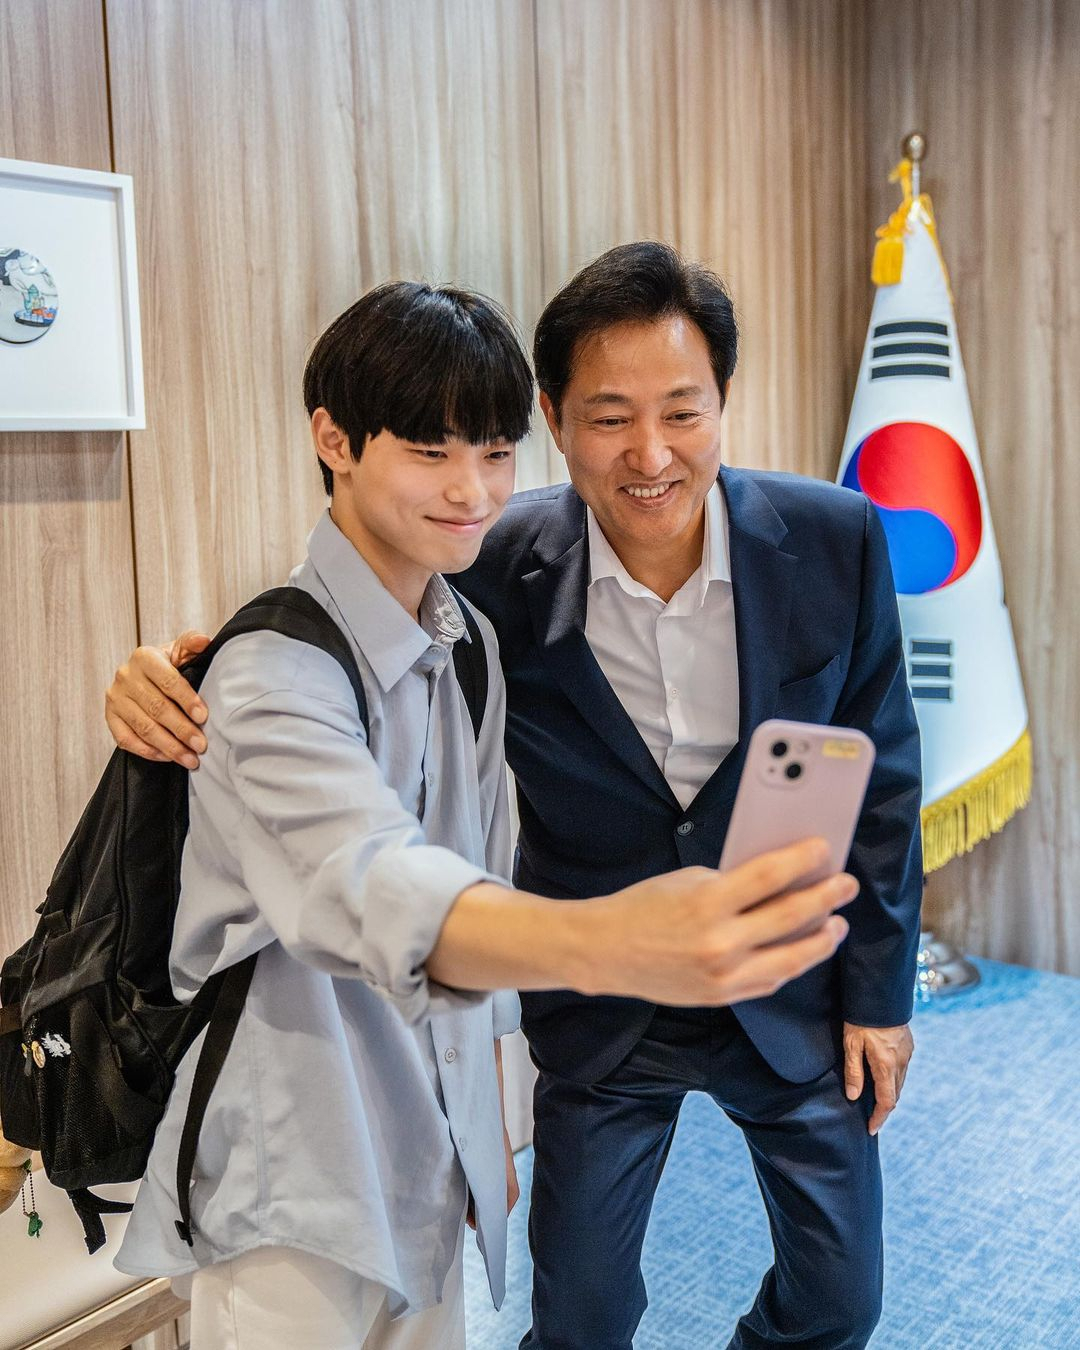 Seoul Mayor Oh Se-hoon poses with good Samaritan Kim for a photo at a meeting in Seoul City Hall on July 13. (Oh Se-hoon's Instagram)